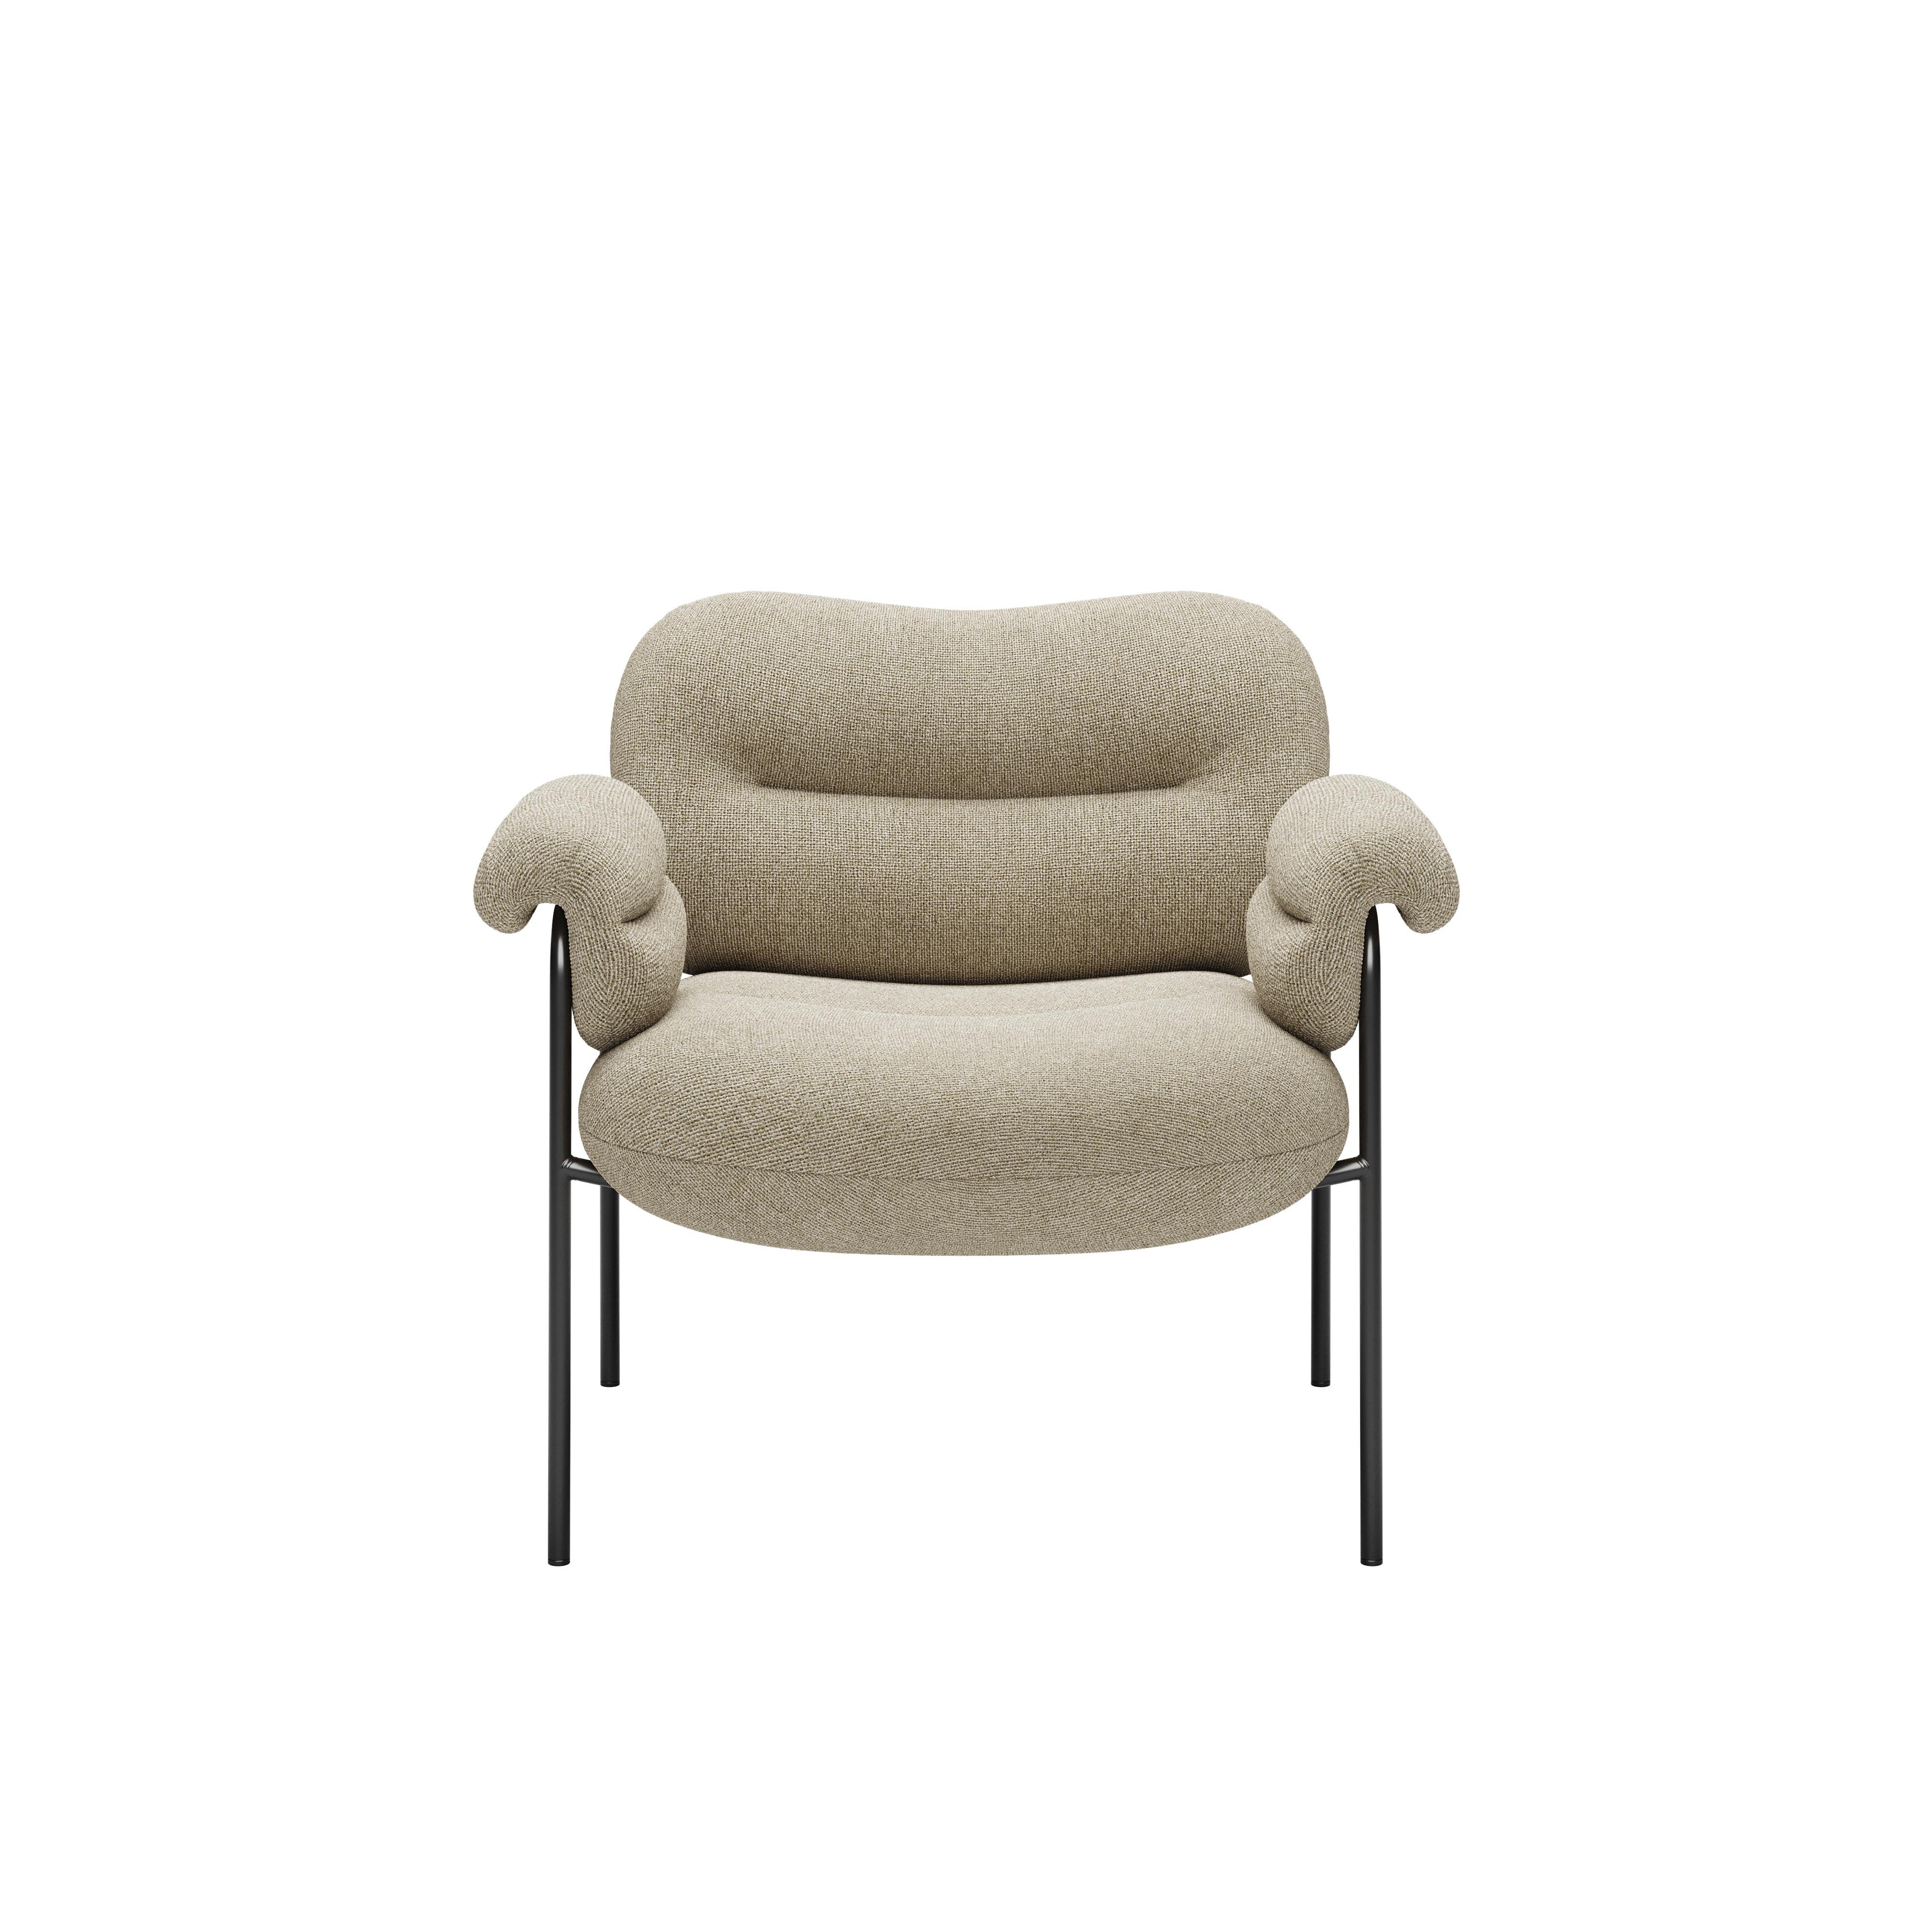 Bollo Armchair by Andreas Engesvik for FOGIA

Model shown on main images: Black steel legs + Fabric: MainlineFlax col.20

Width: 81cm /32in
Depth: 81cm /32in
Height: 71cm /28in
Seat Height: 42.5cm /17in
Seat Depth: 54cm / 21in

The iconic Bollo